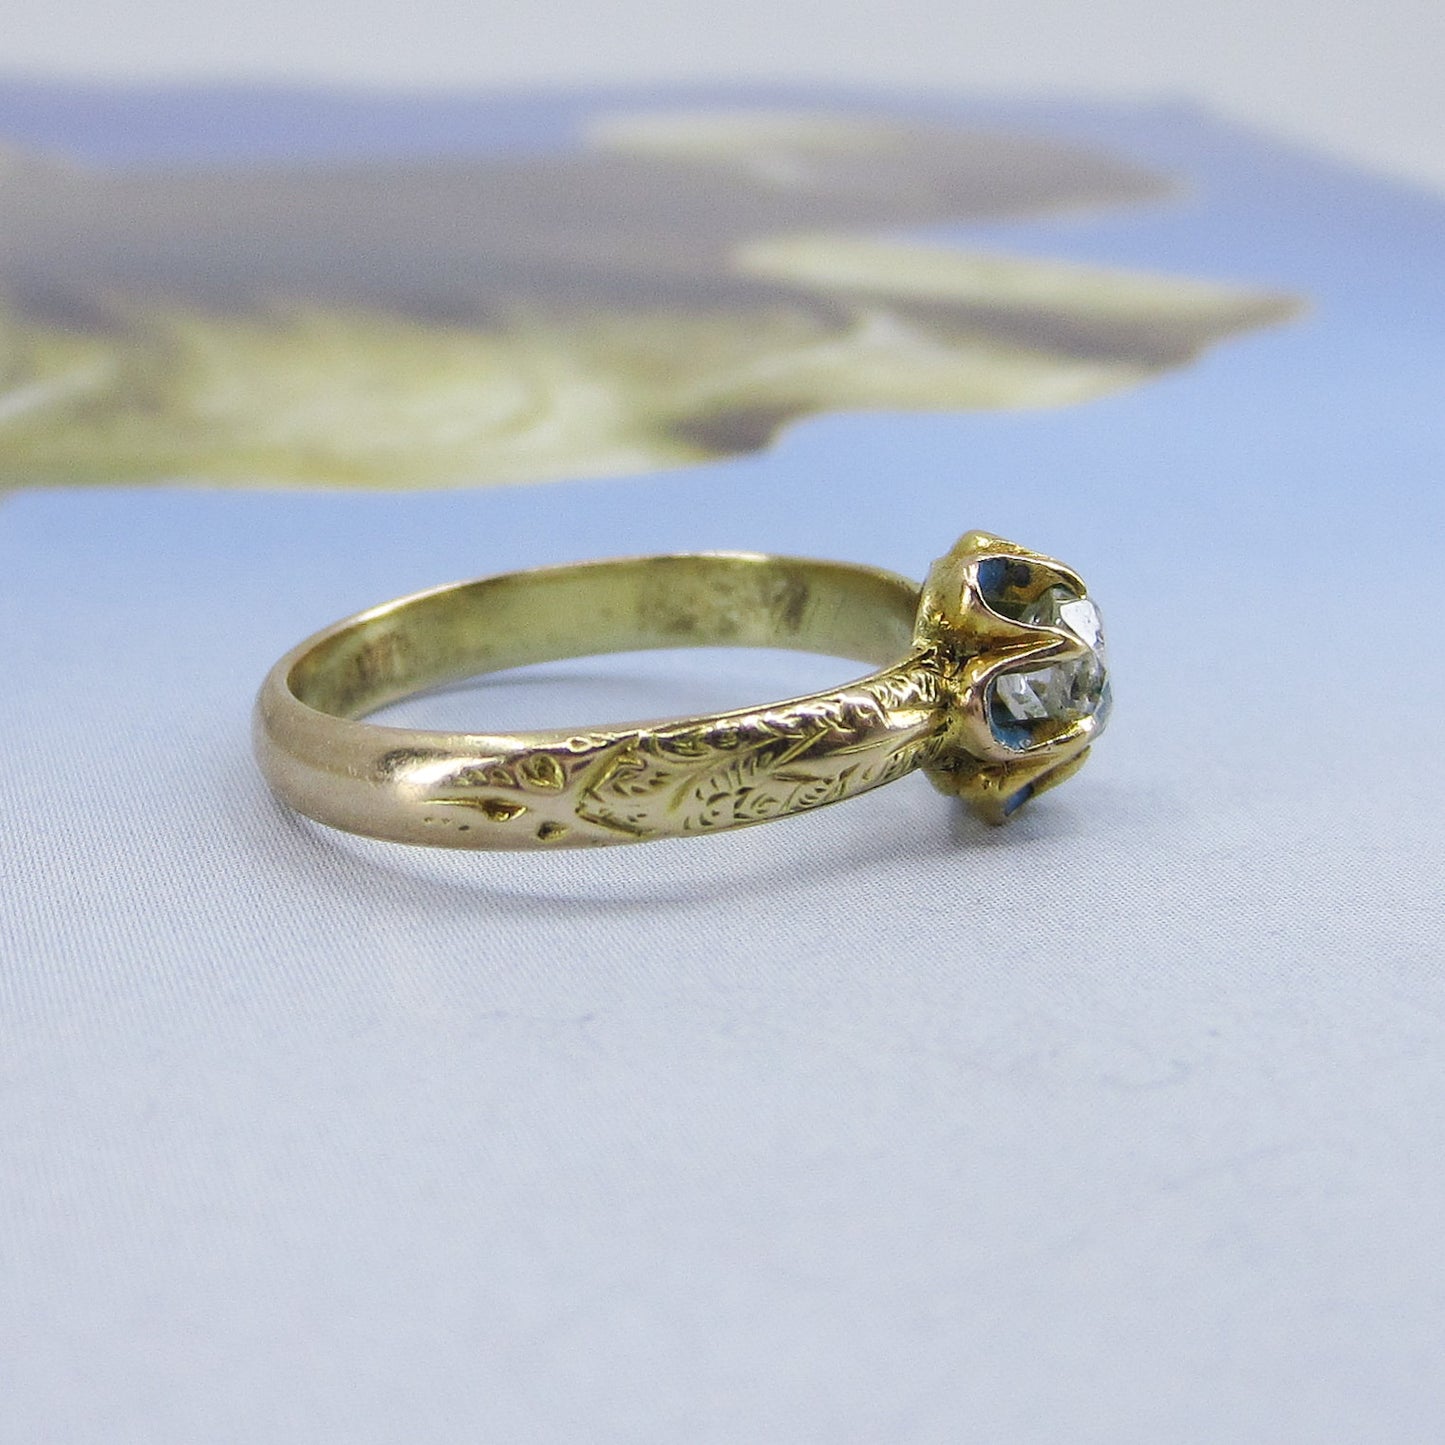 SOLD-Victorian Old Mine Diamond and Enamel Engraved Band Ring 14k c. 1840